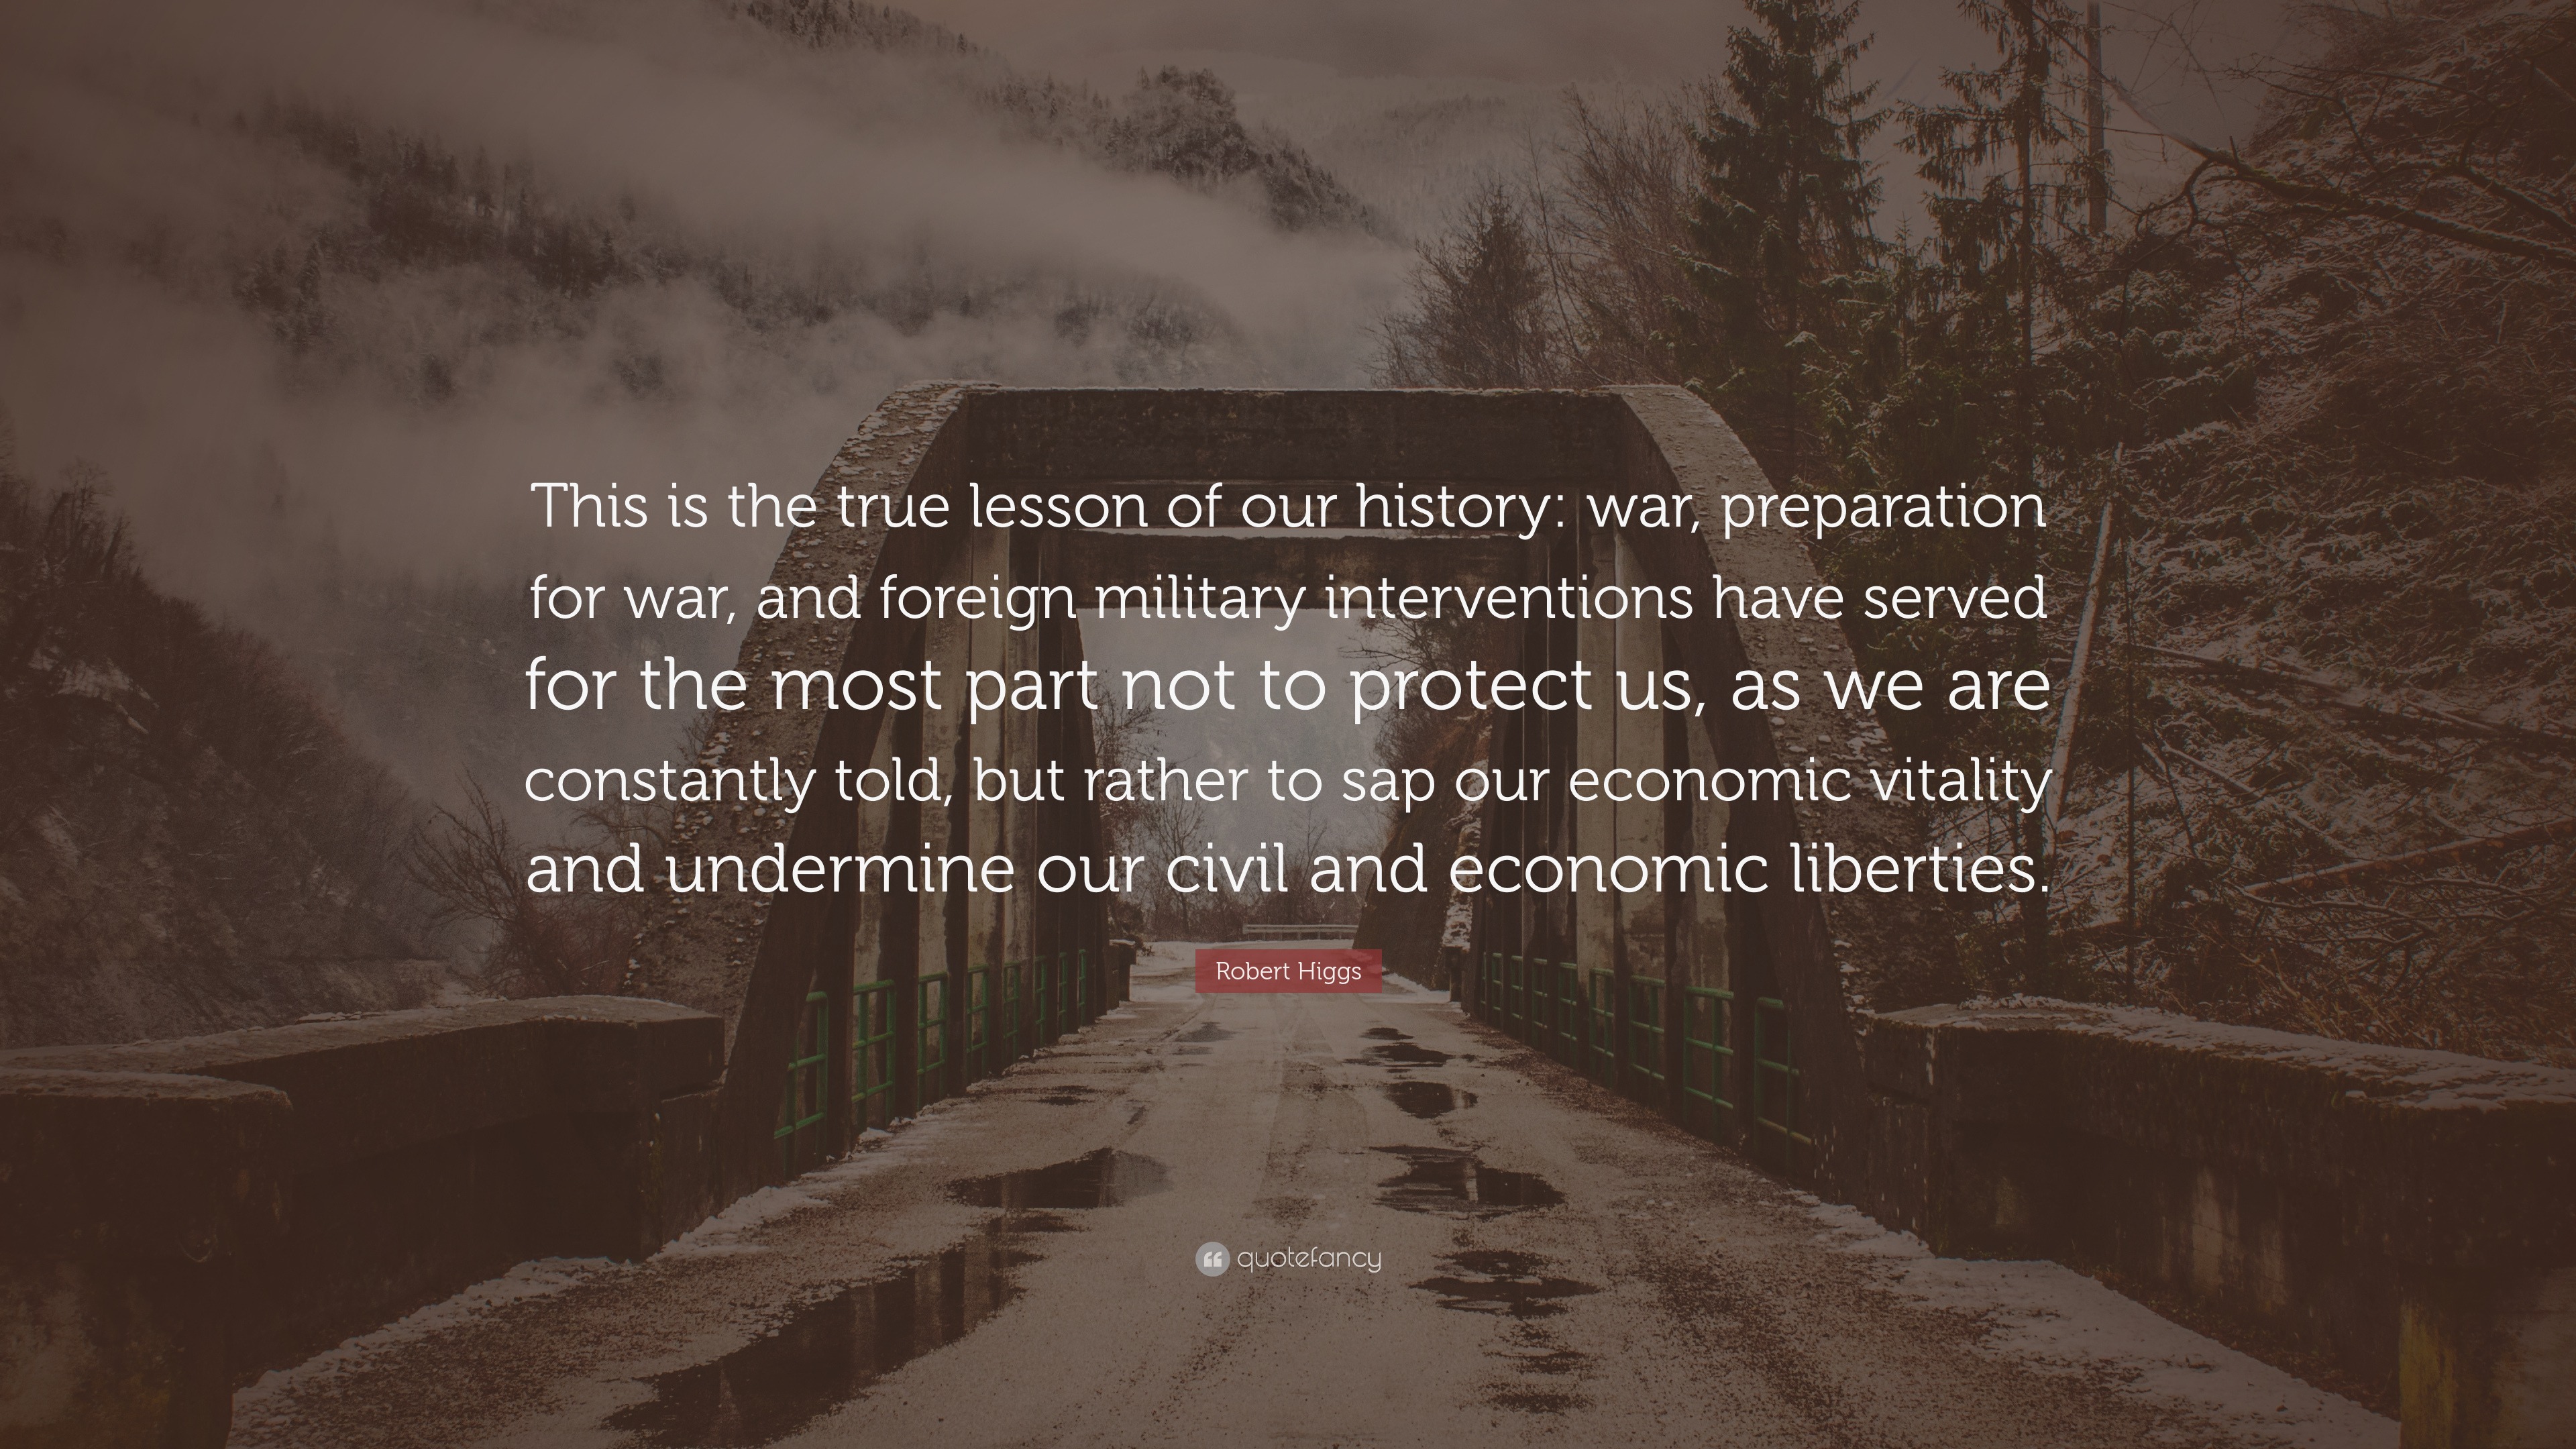 5924482-Robert-Higgs-Quote-This-is-the-true-lesson-of-our-history-war.jpg